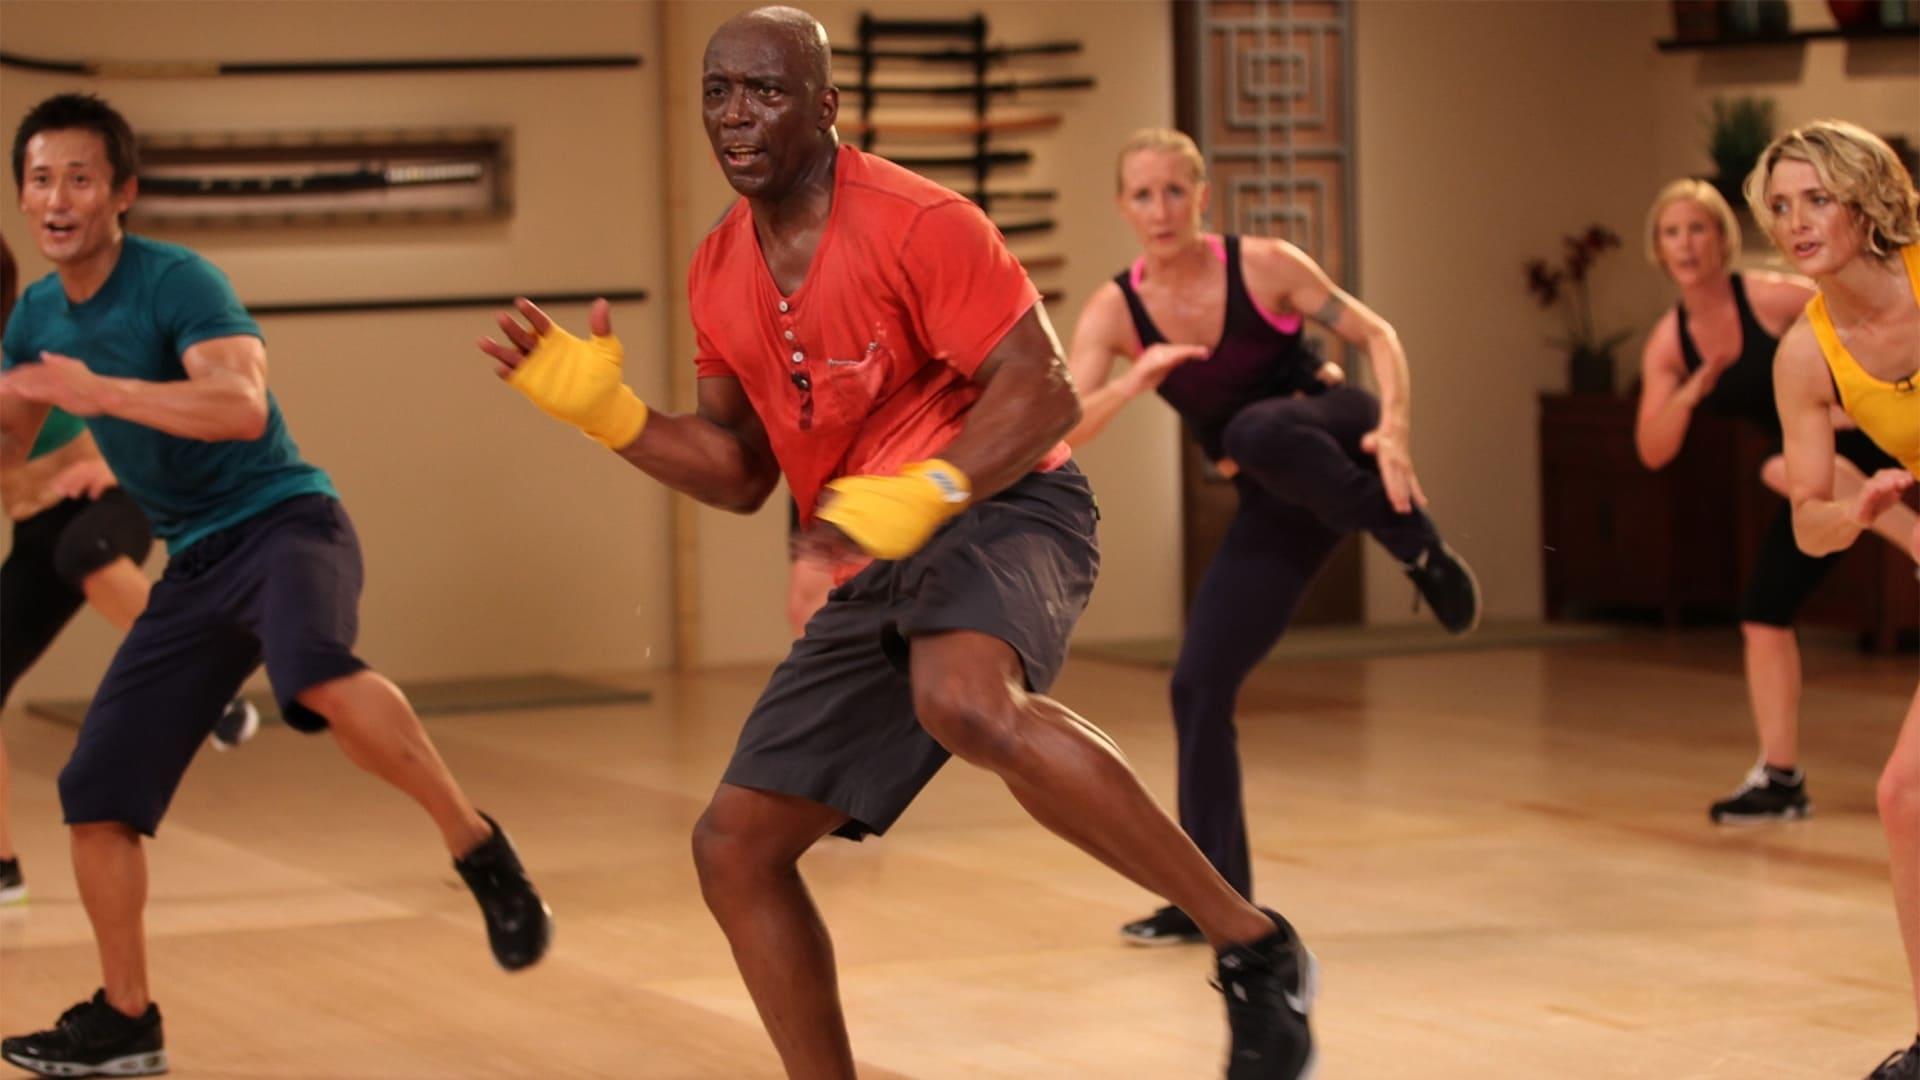 Billy Blanks: This Is Tae Bo backdrop